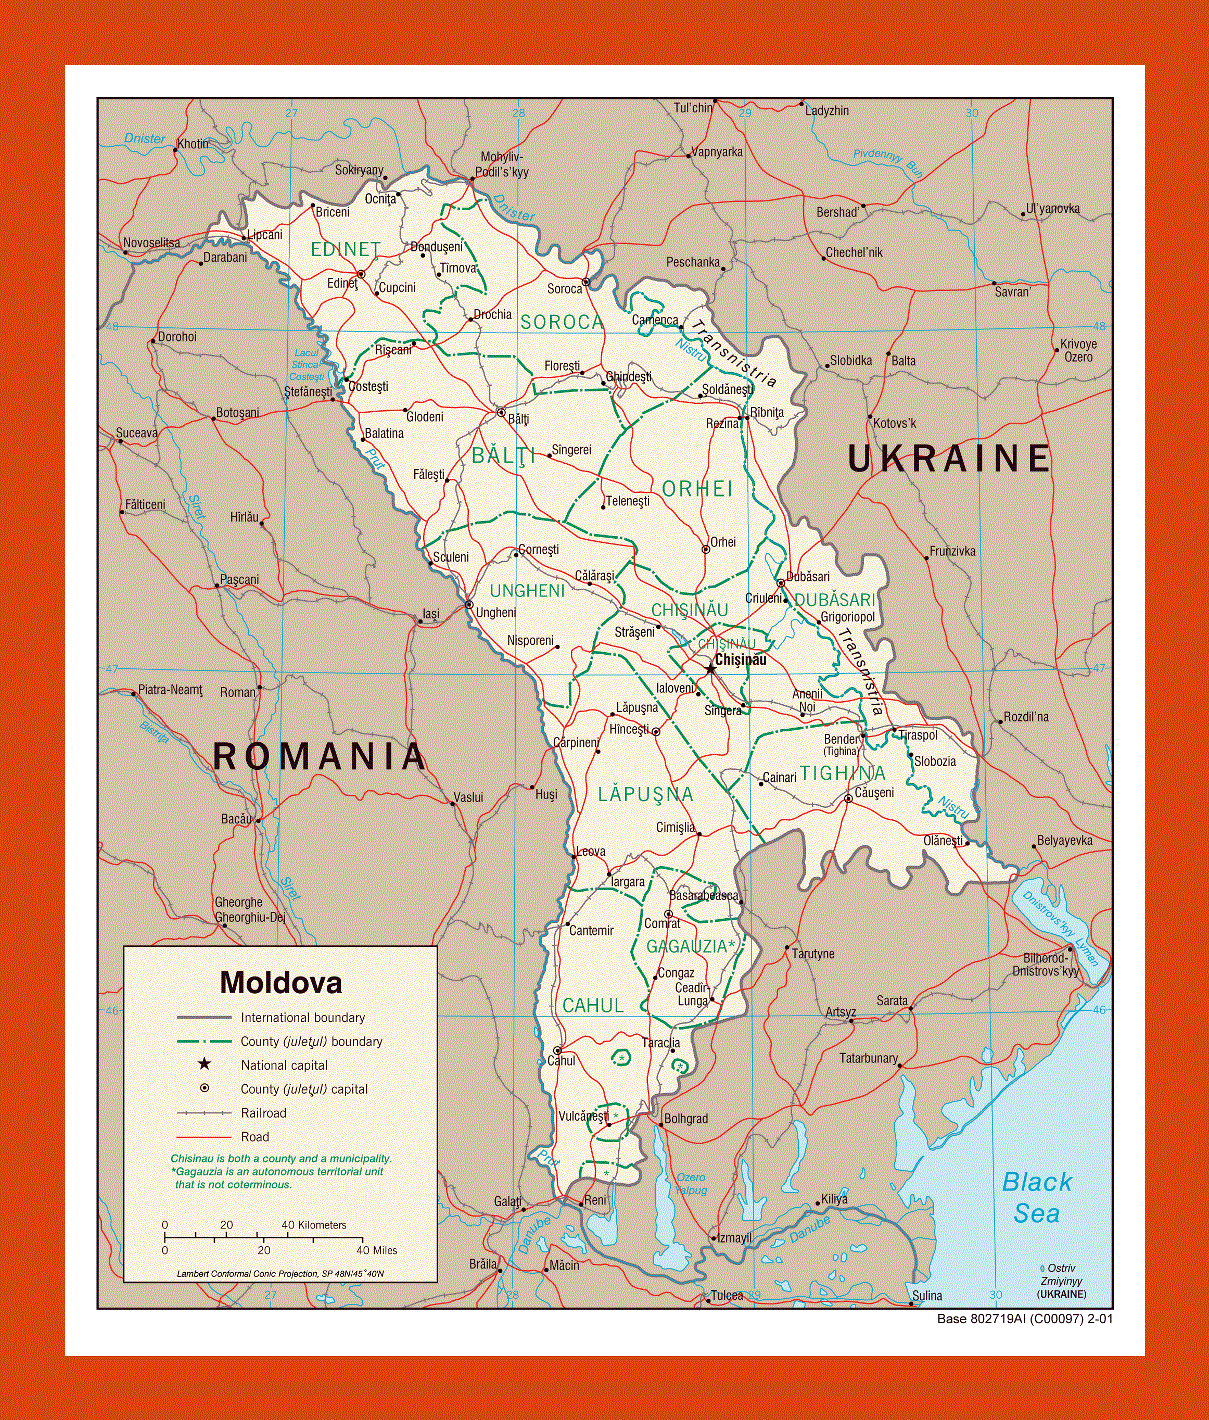 Political and administrative map of Moldova - 2001